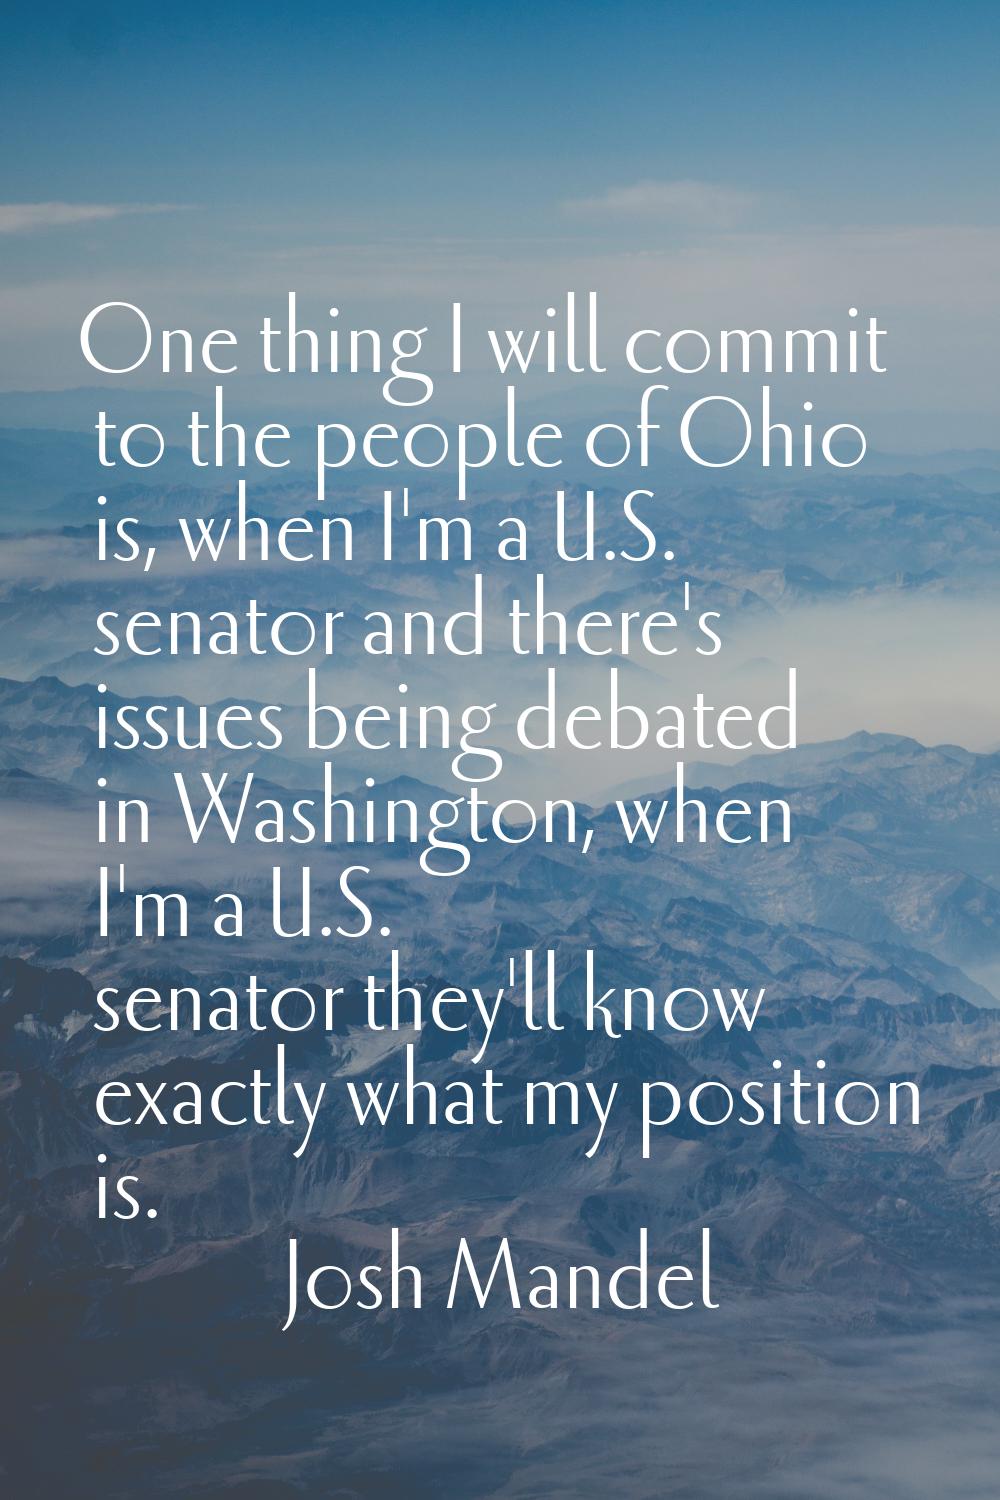 One thing I will commit to the people of Ohio is, when I'm a U.S. senator and there's issues being 